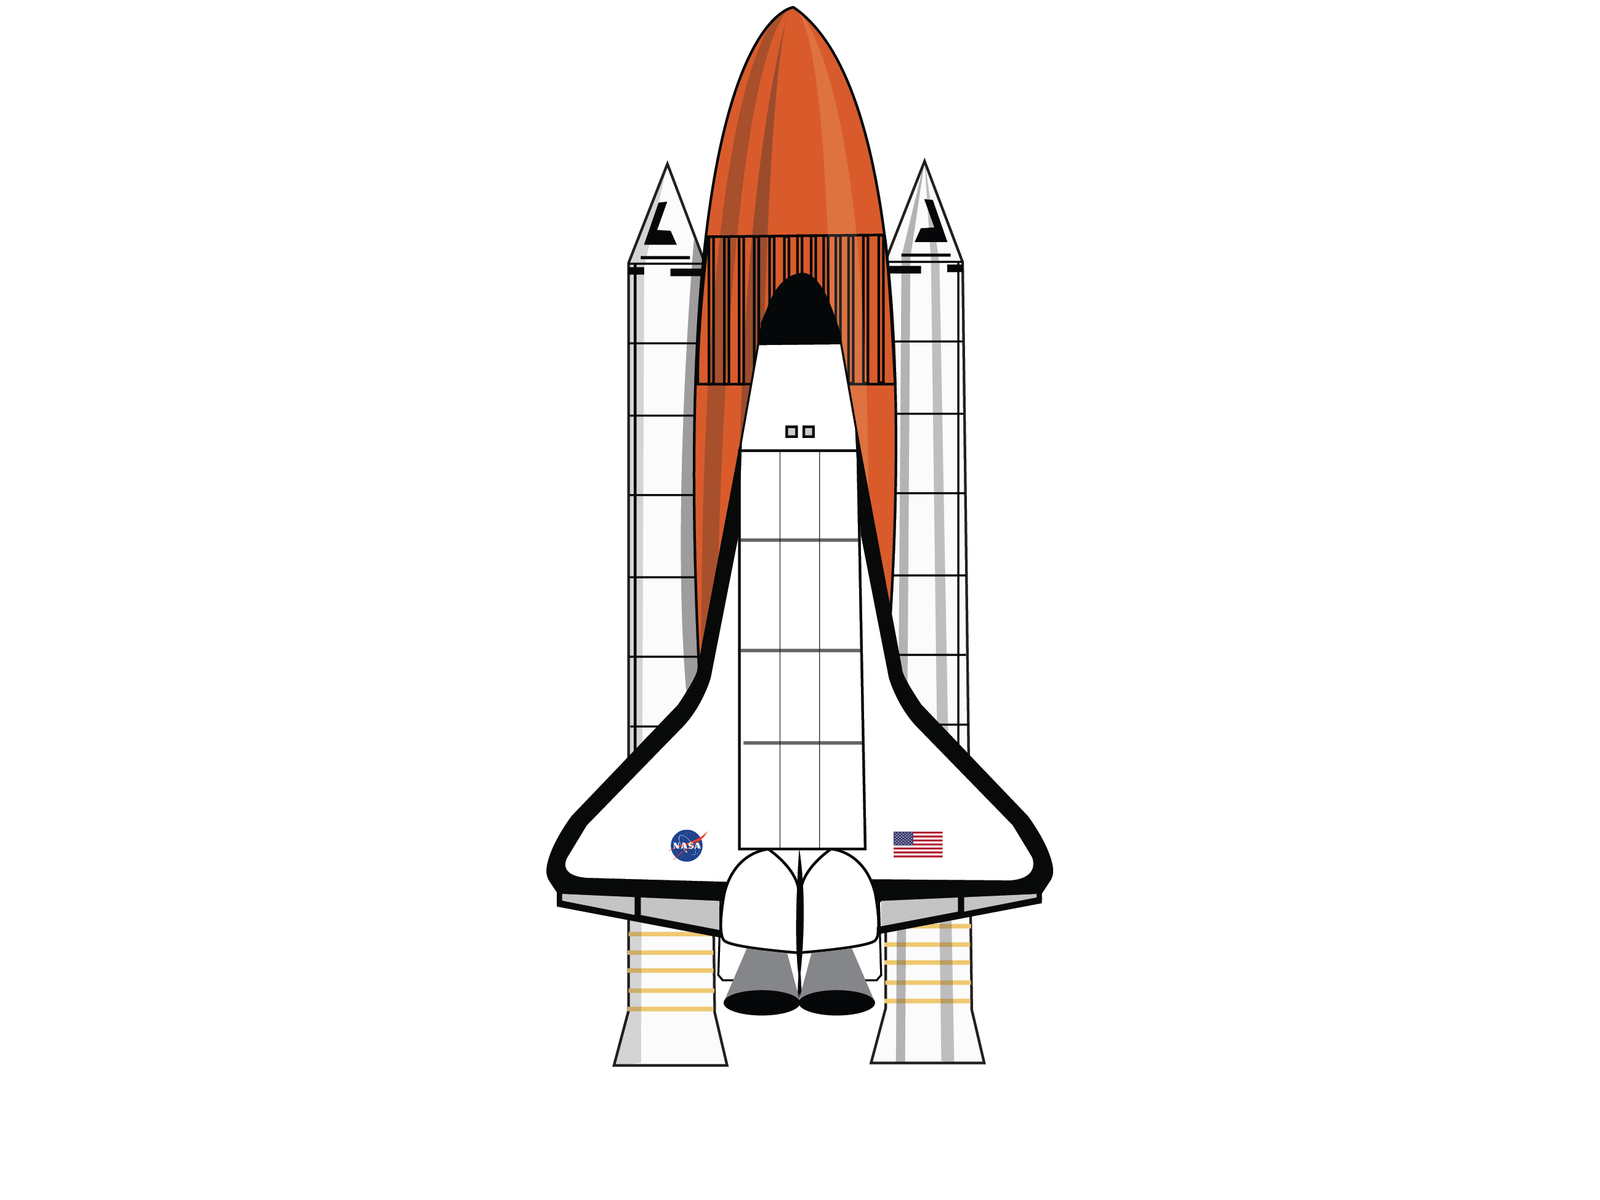 Space Shuttle illustration by chandler tisby on Dribbble